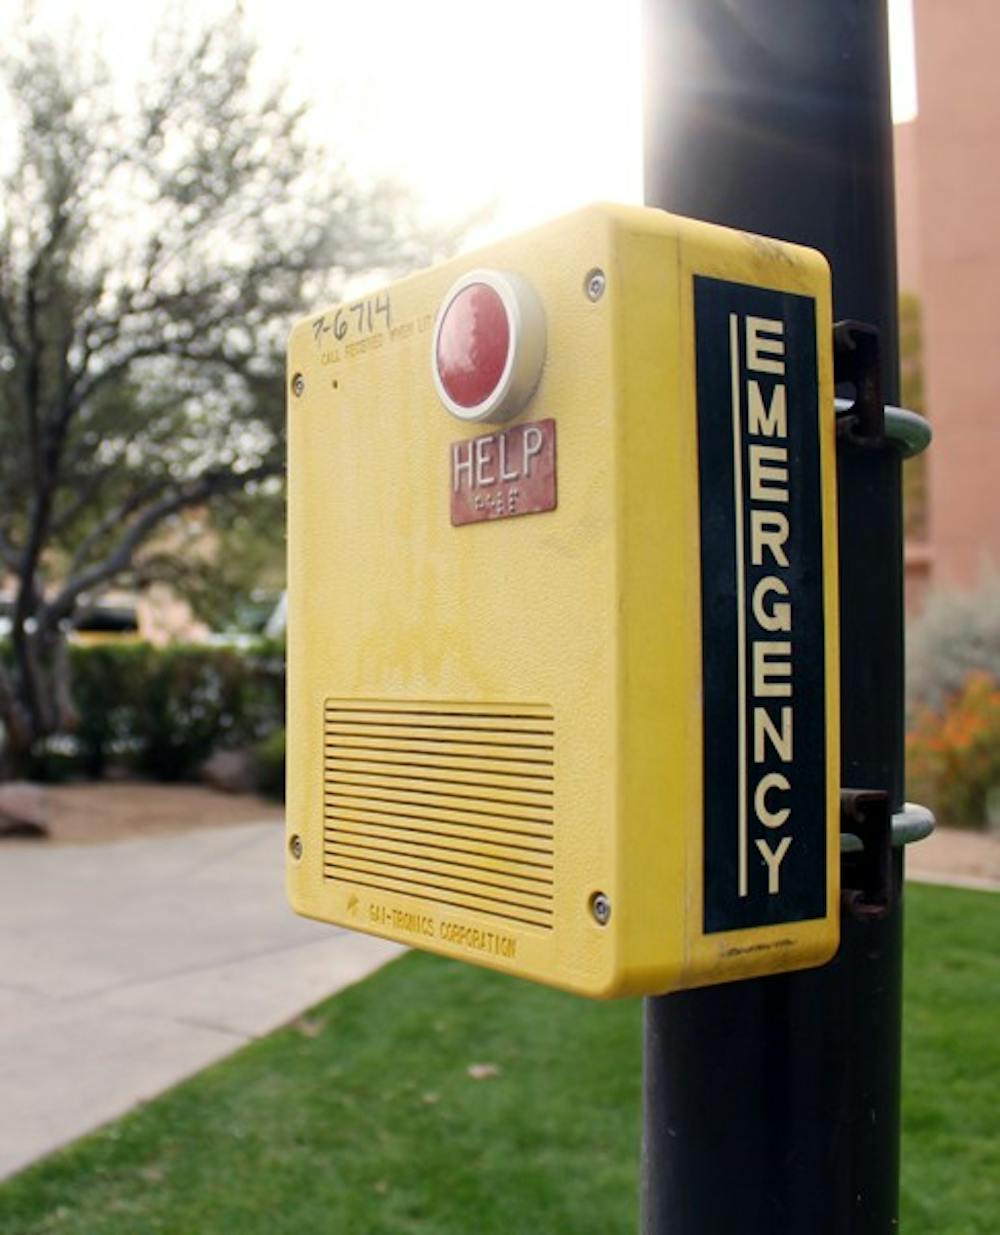 The use of emergency call boxes has decreased among students as cell phone usage has increased in the past few years. (Photo by Jenn Allen)